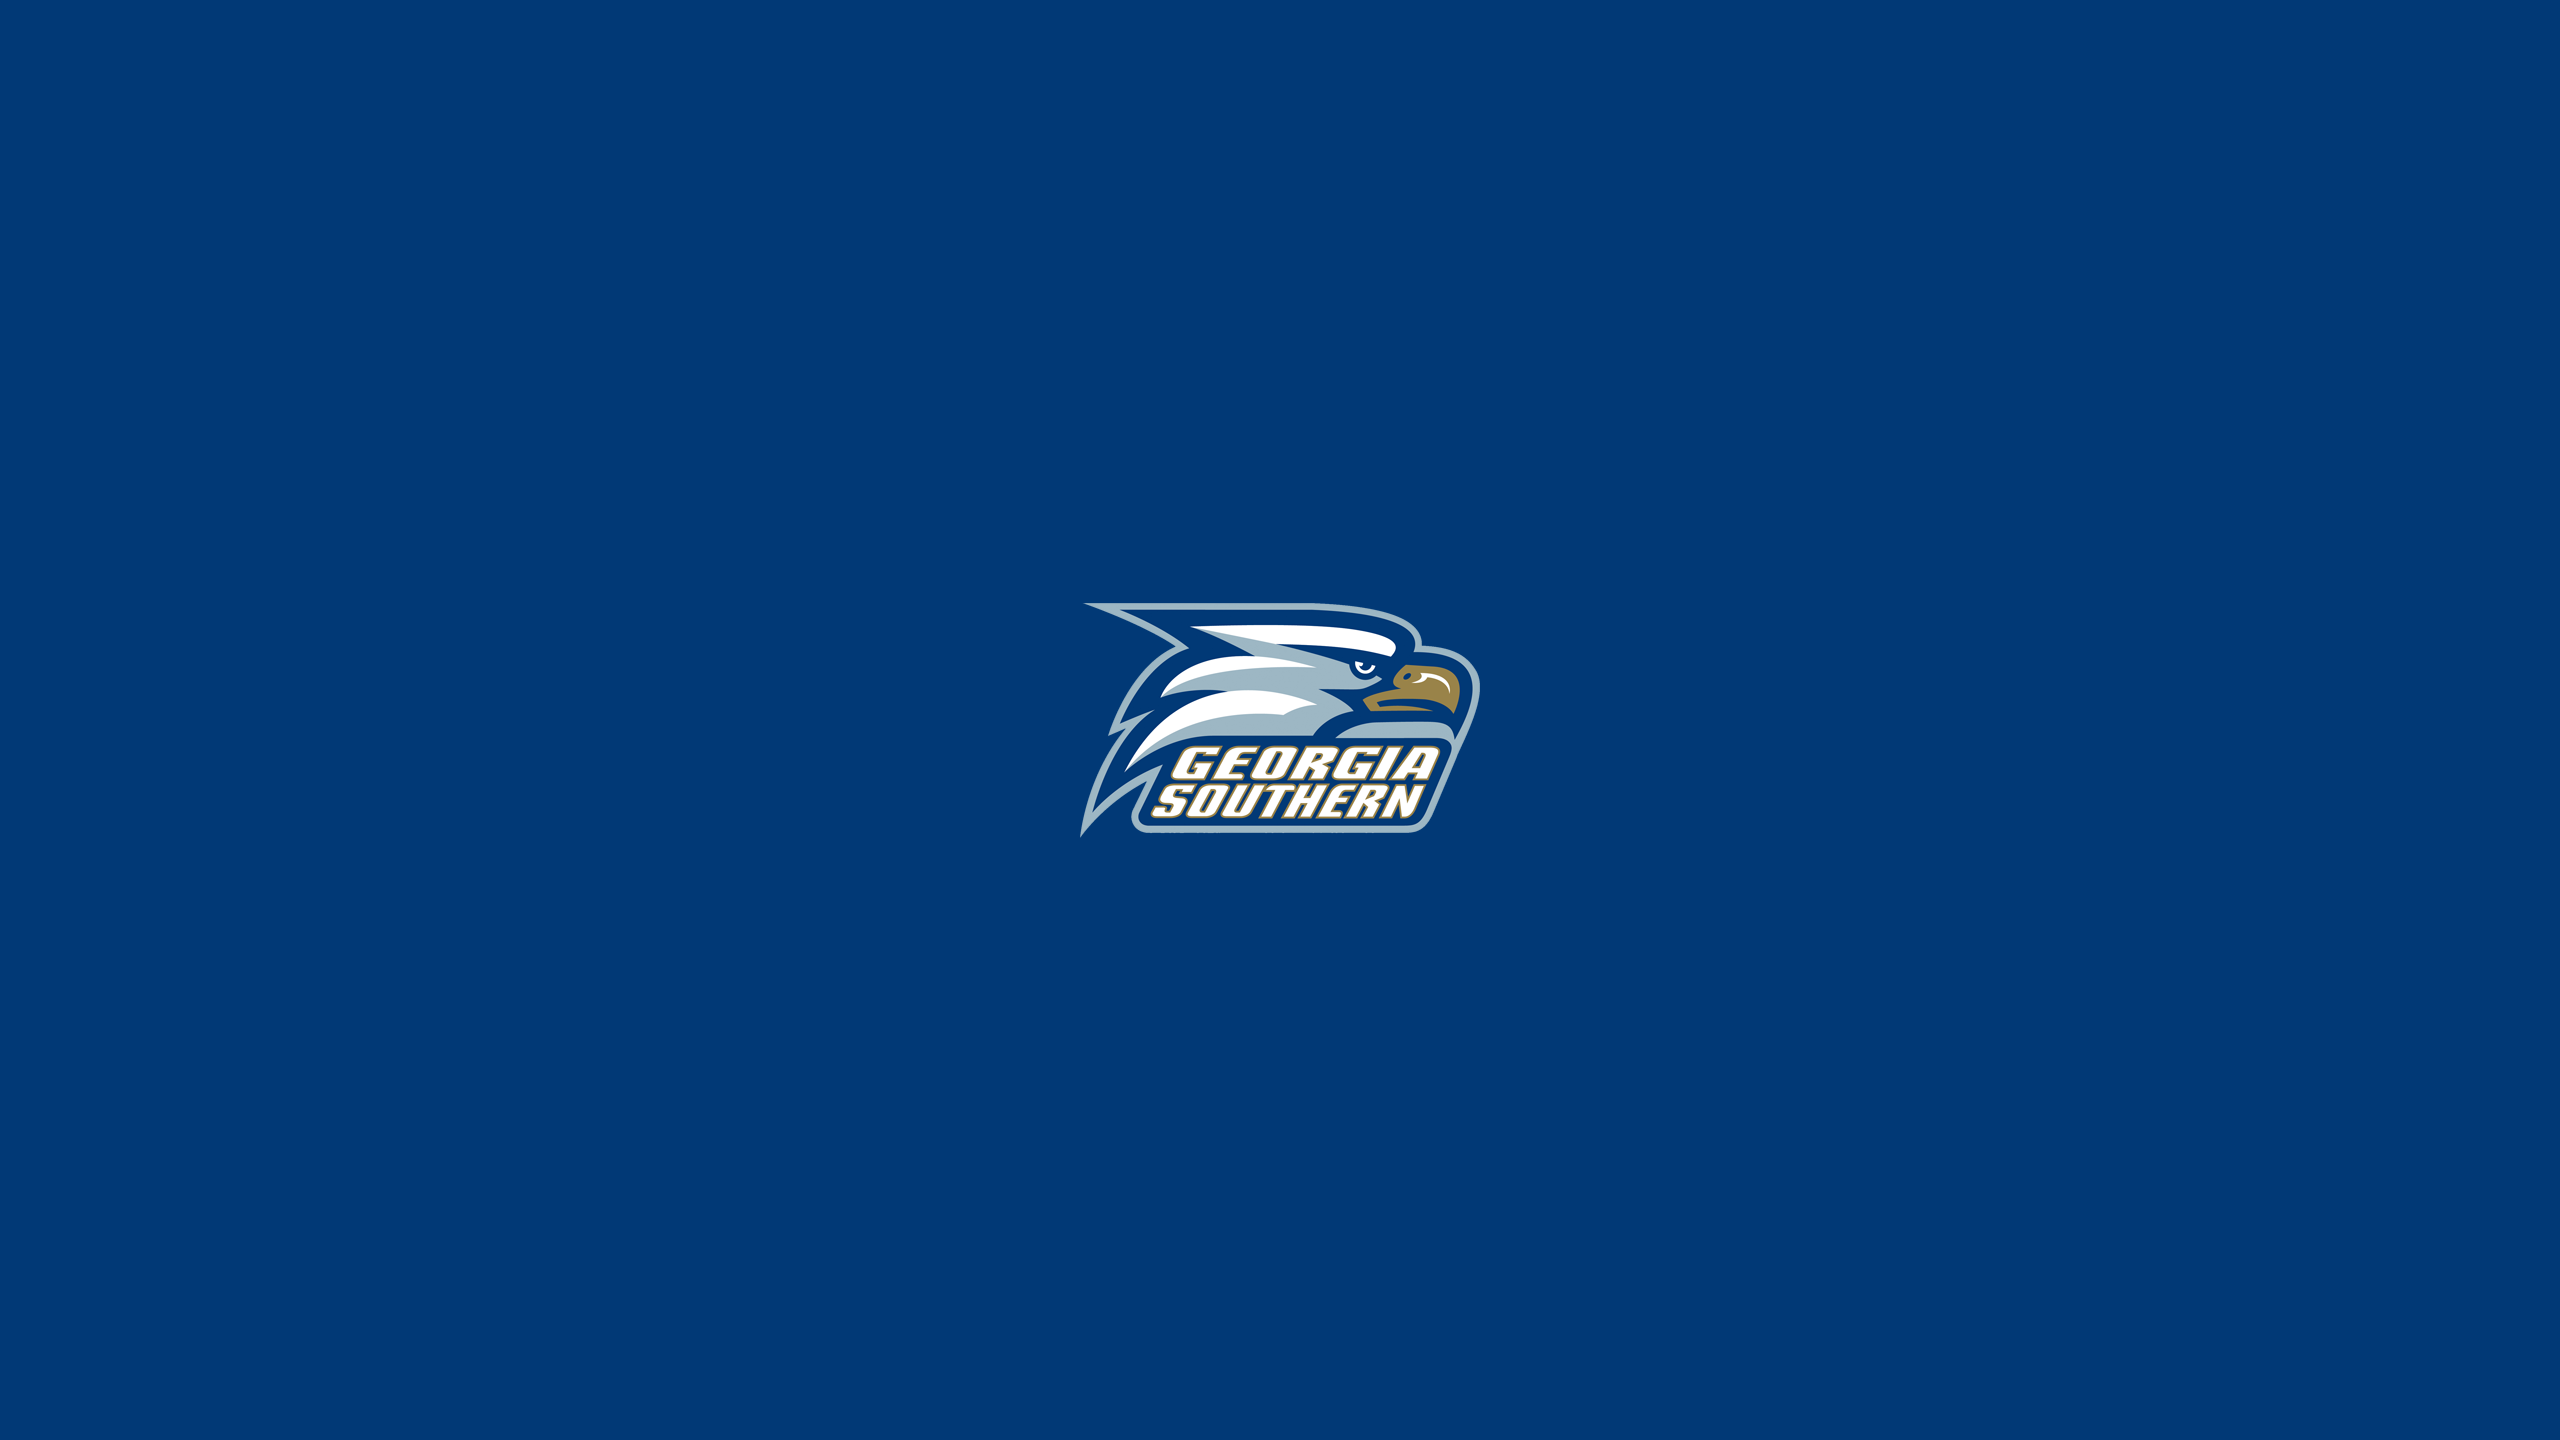 Georgia Southern Eagles - NCAAF - Square Bettor